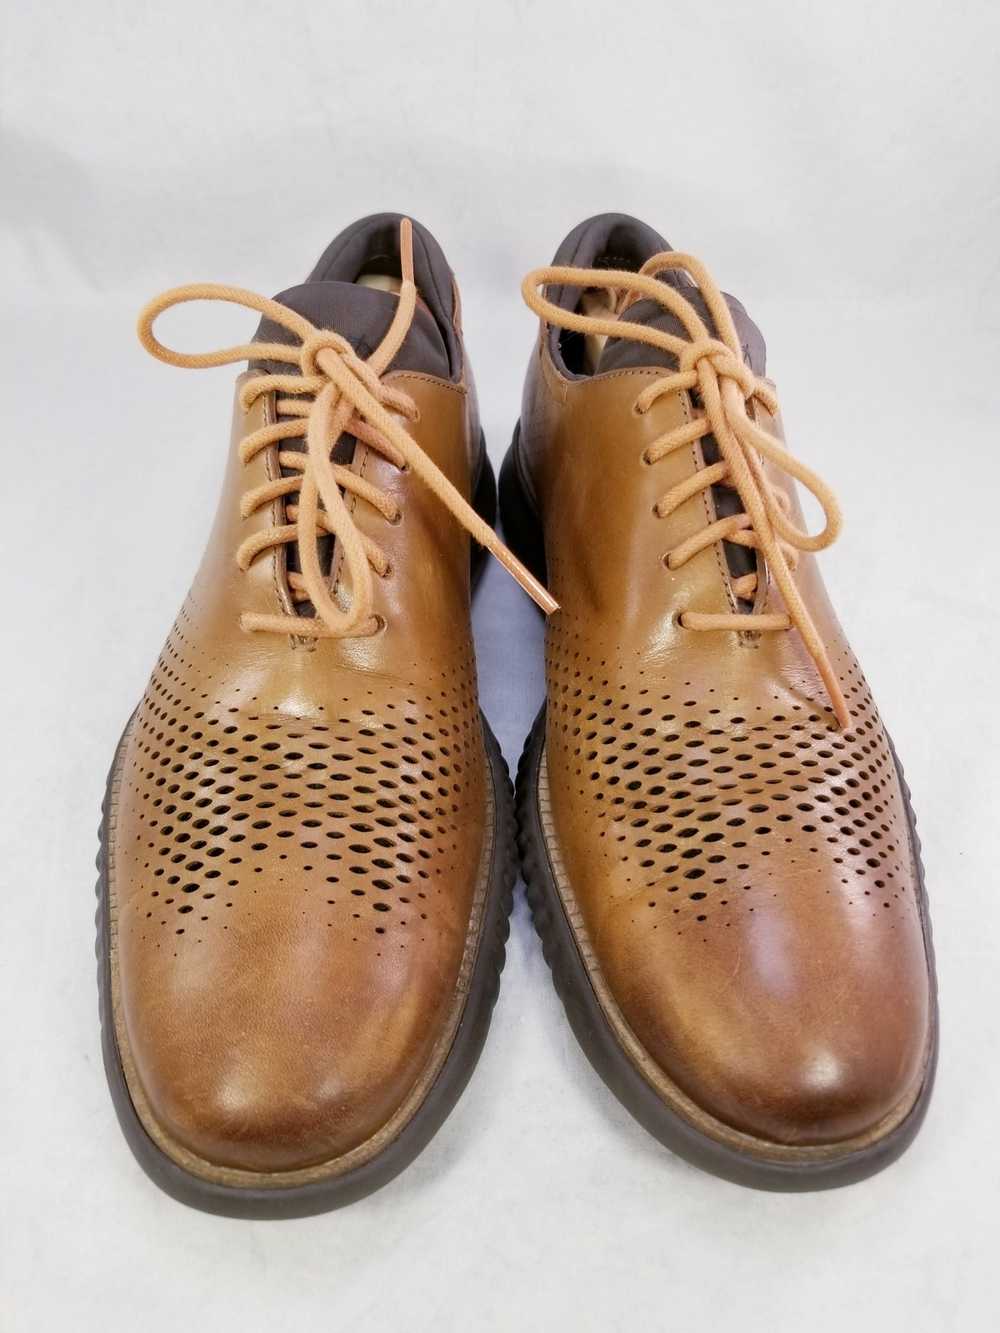 Cole Haan ZEROGRAND OXFORDS WALKING SHOES - image 4